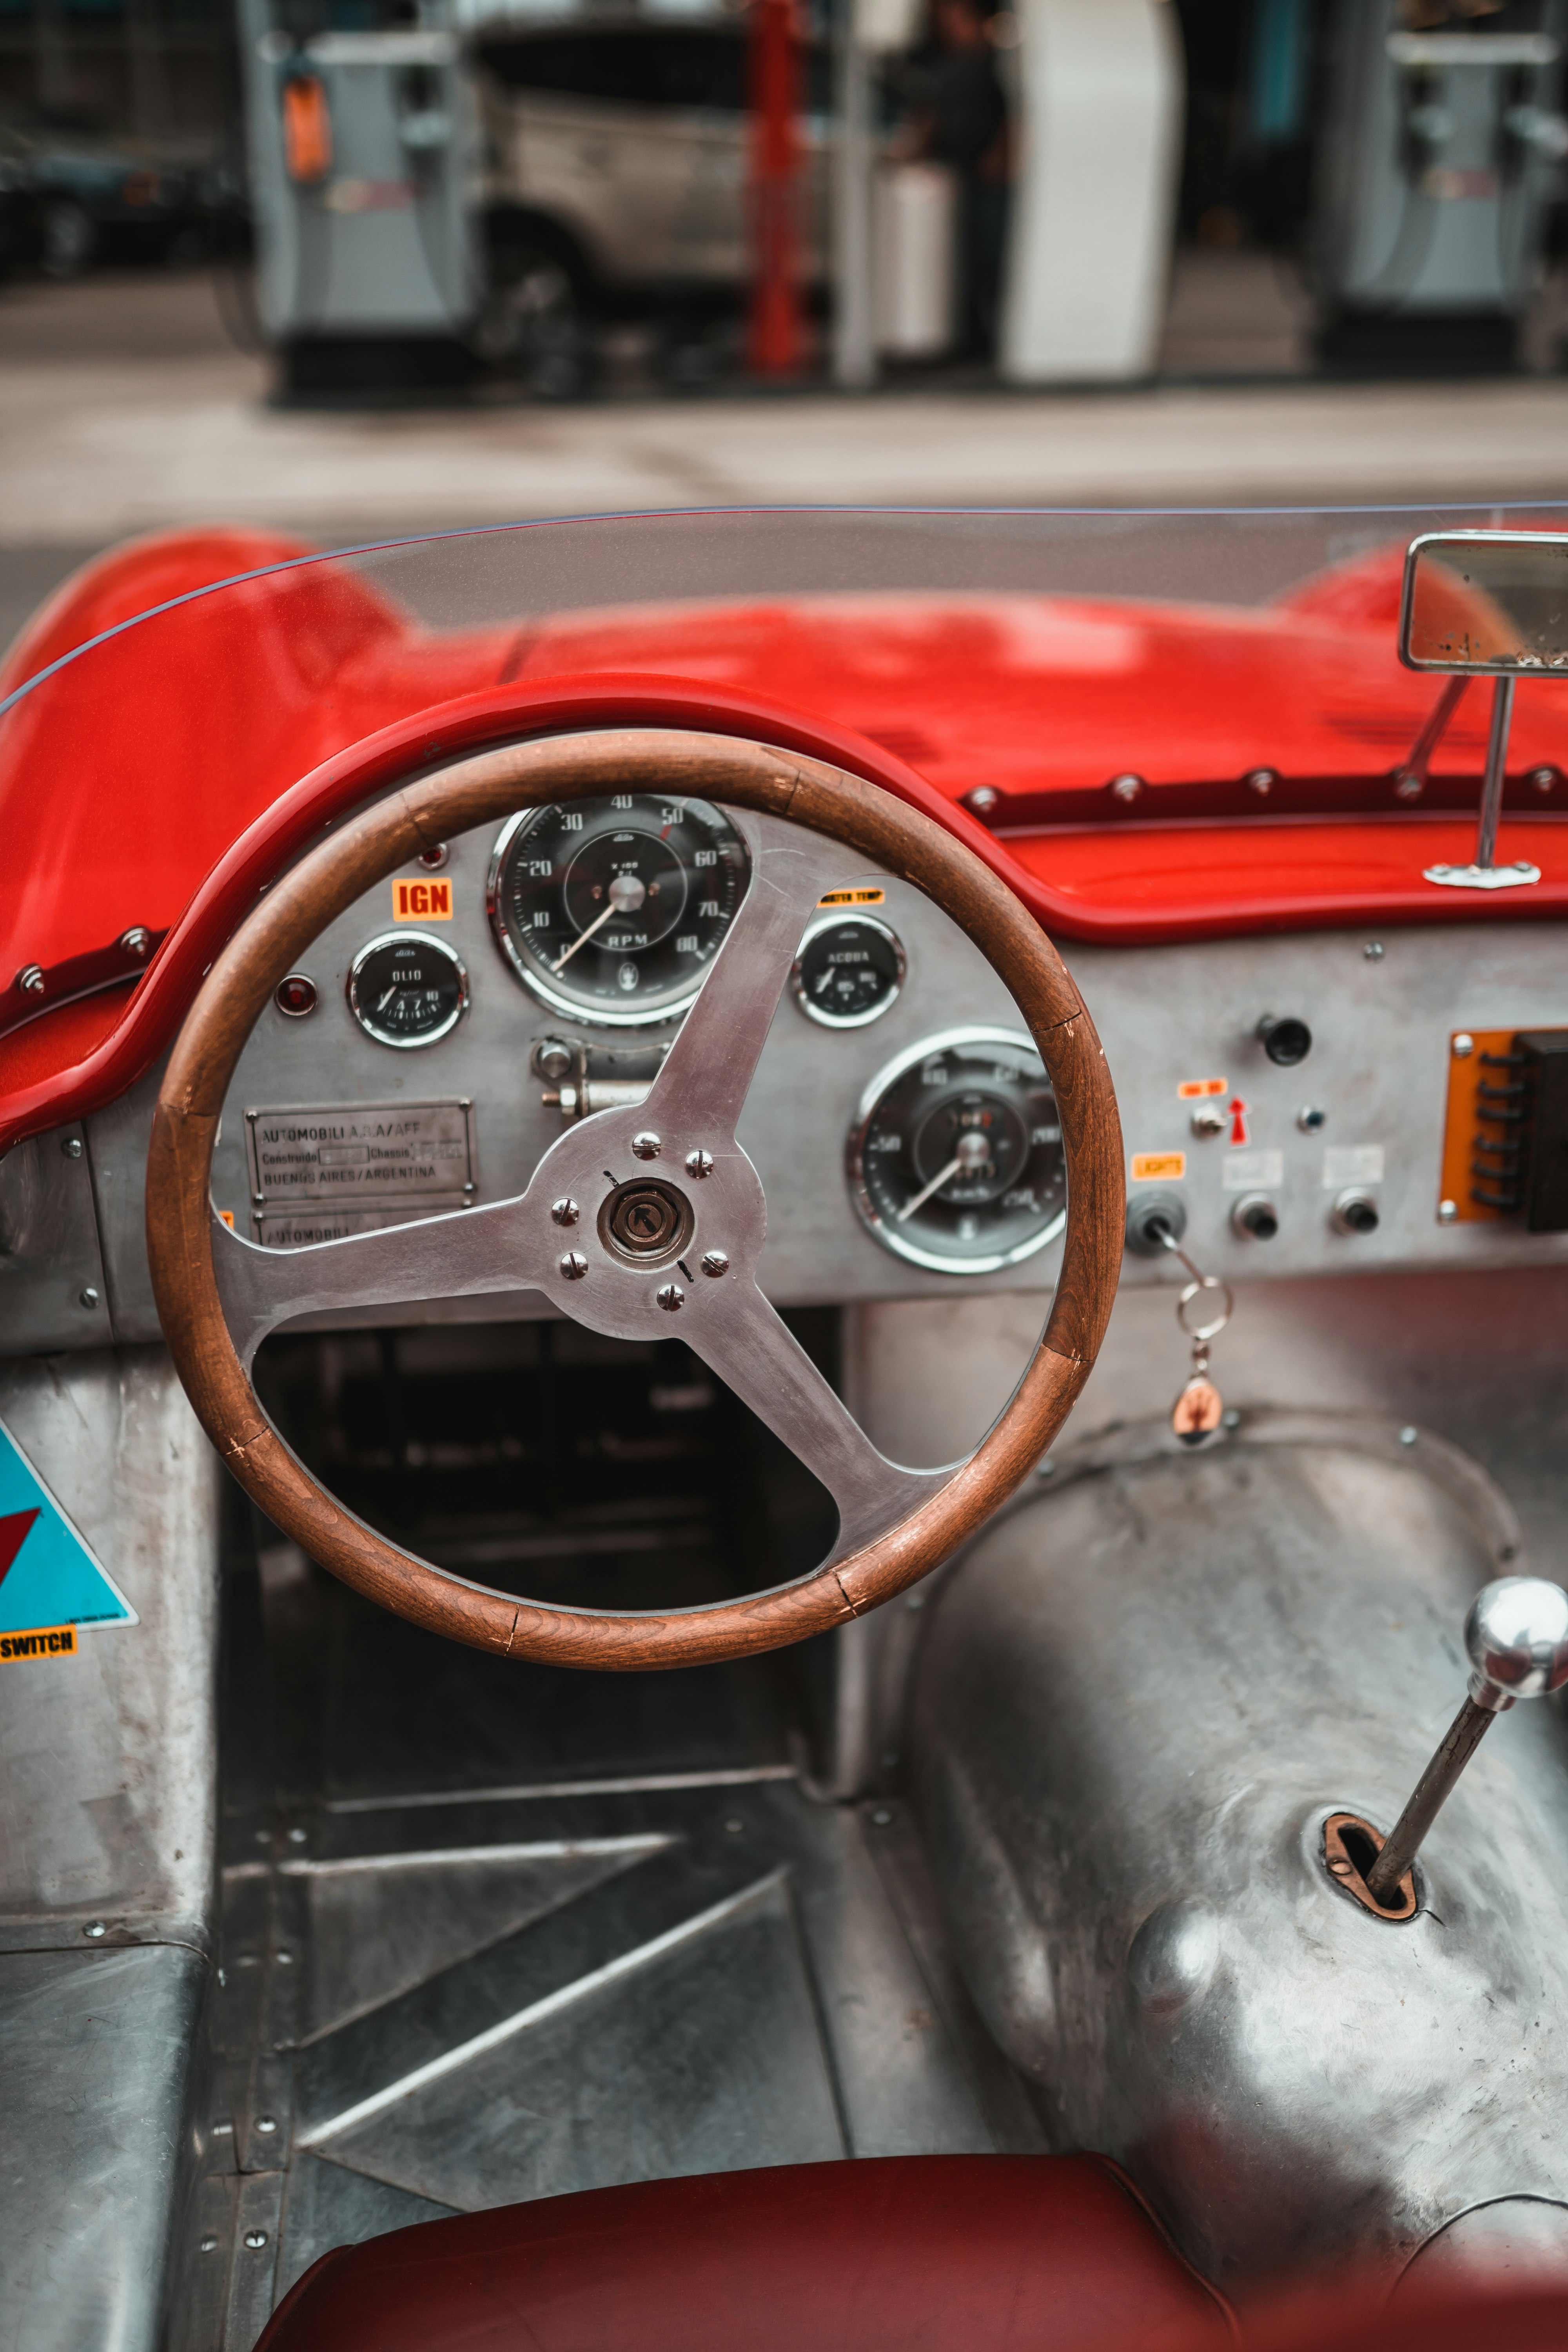 red and silver steering wheel